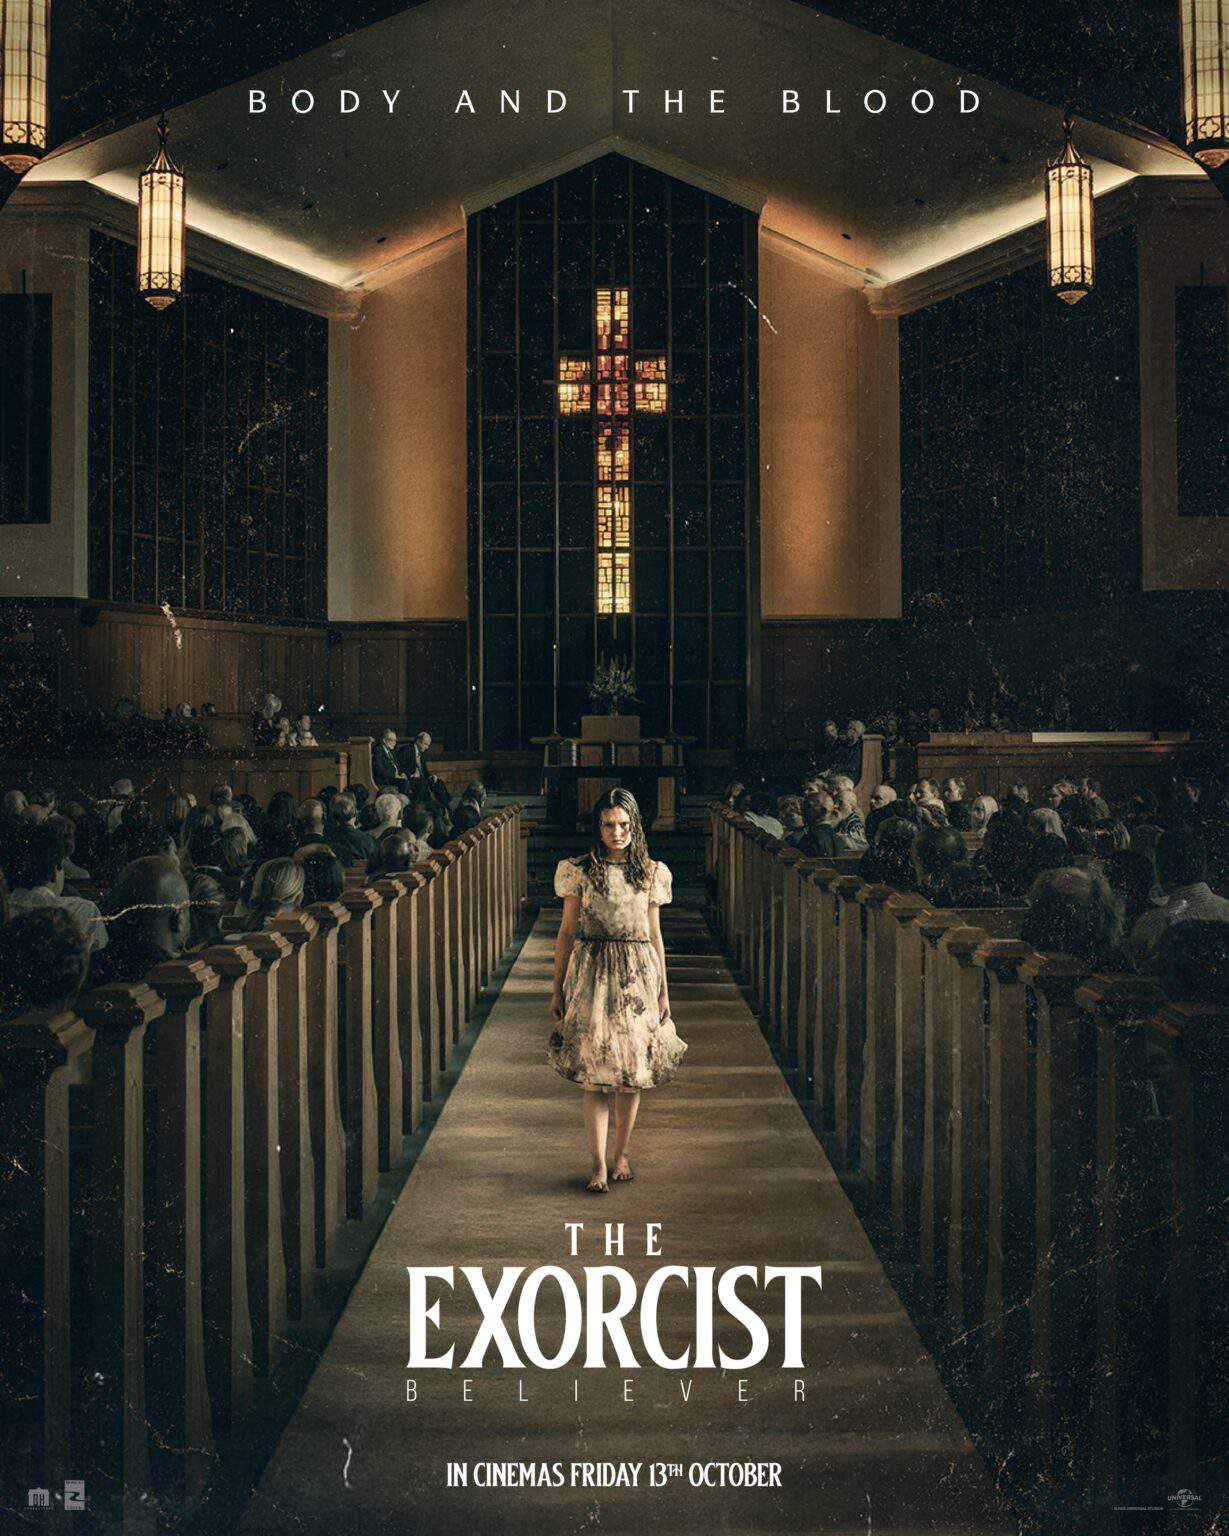 The Exorcist: Believer promo puts a possessed girl in church